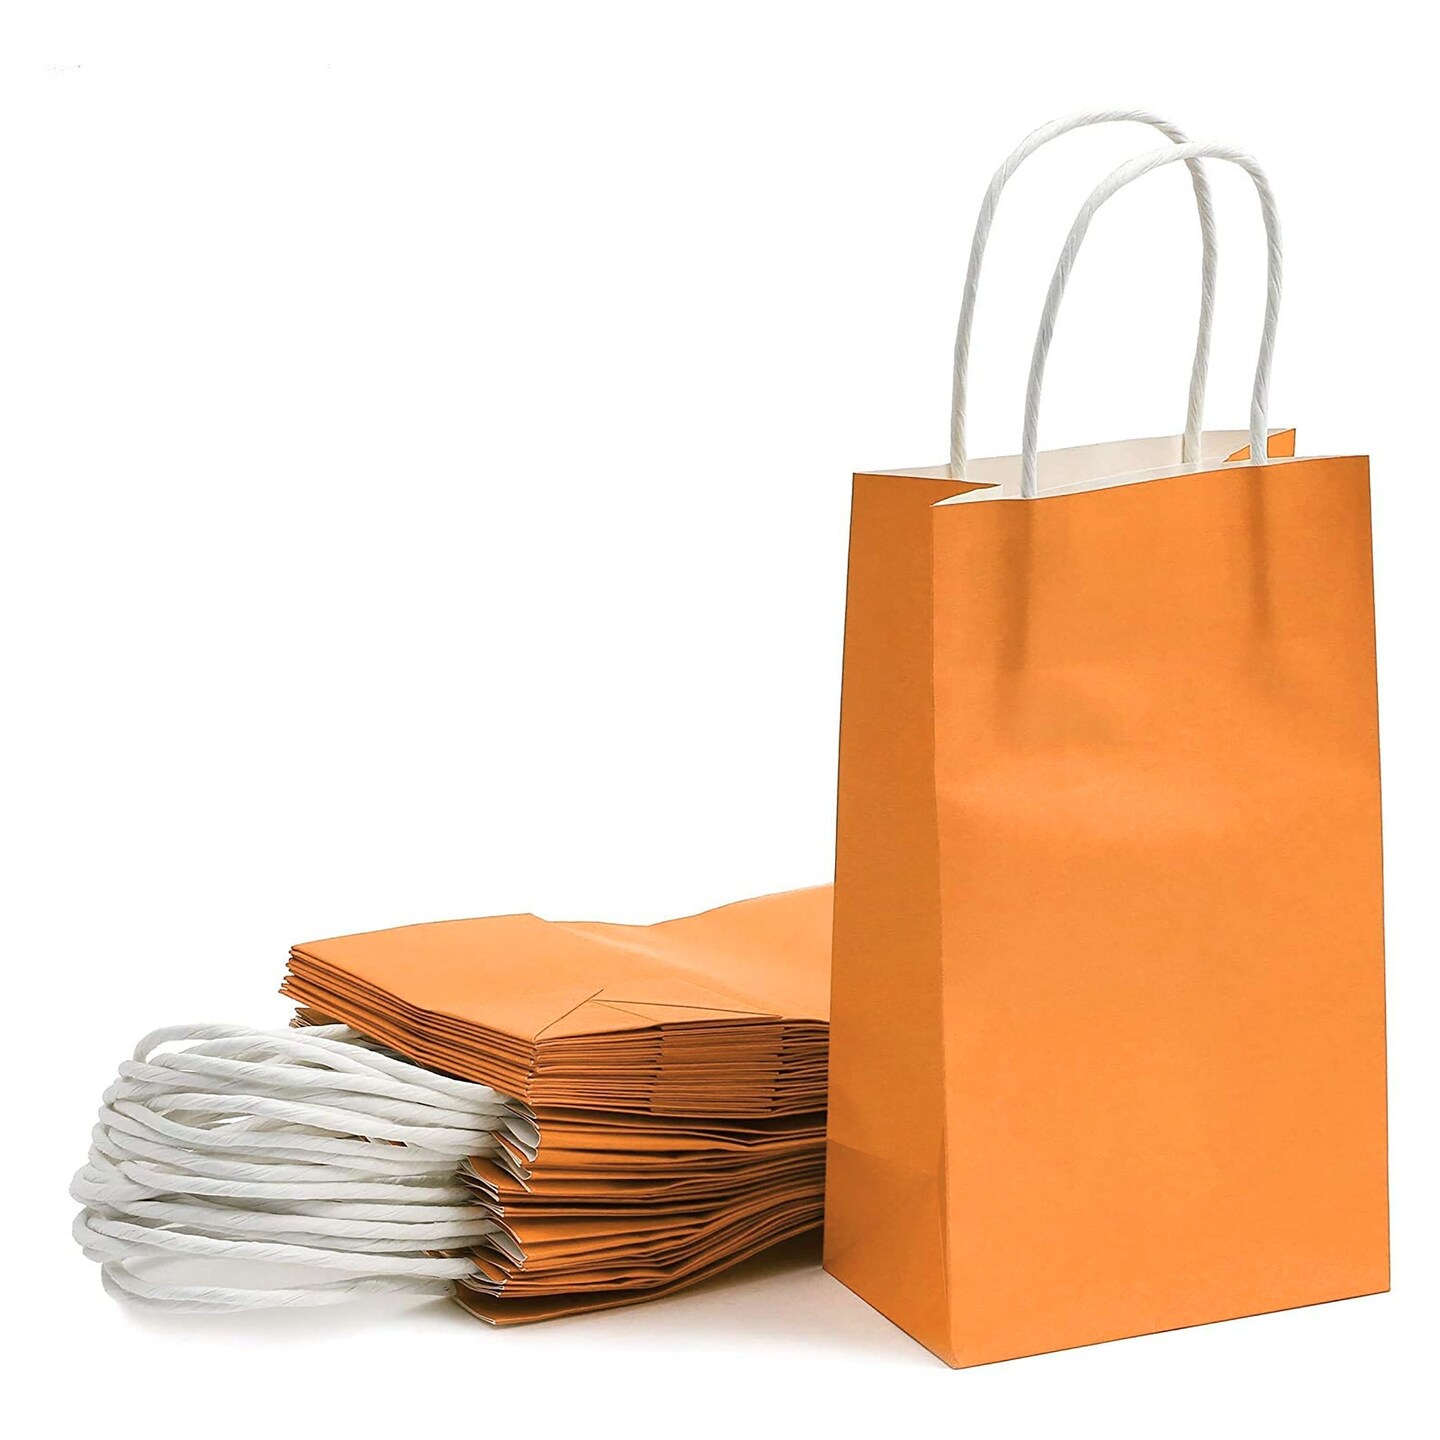 25-Pack Orange Gift Bags with Handles - Small Paper Treat Bags for Birthday, Wedding, Retail (5.3x3.2x9 In)